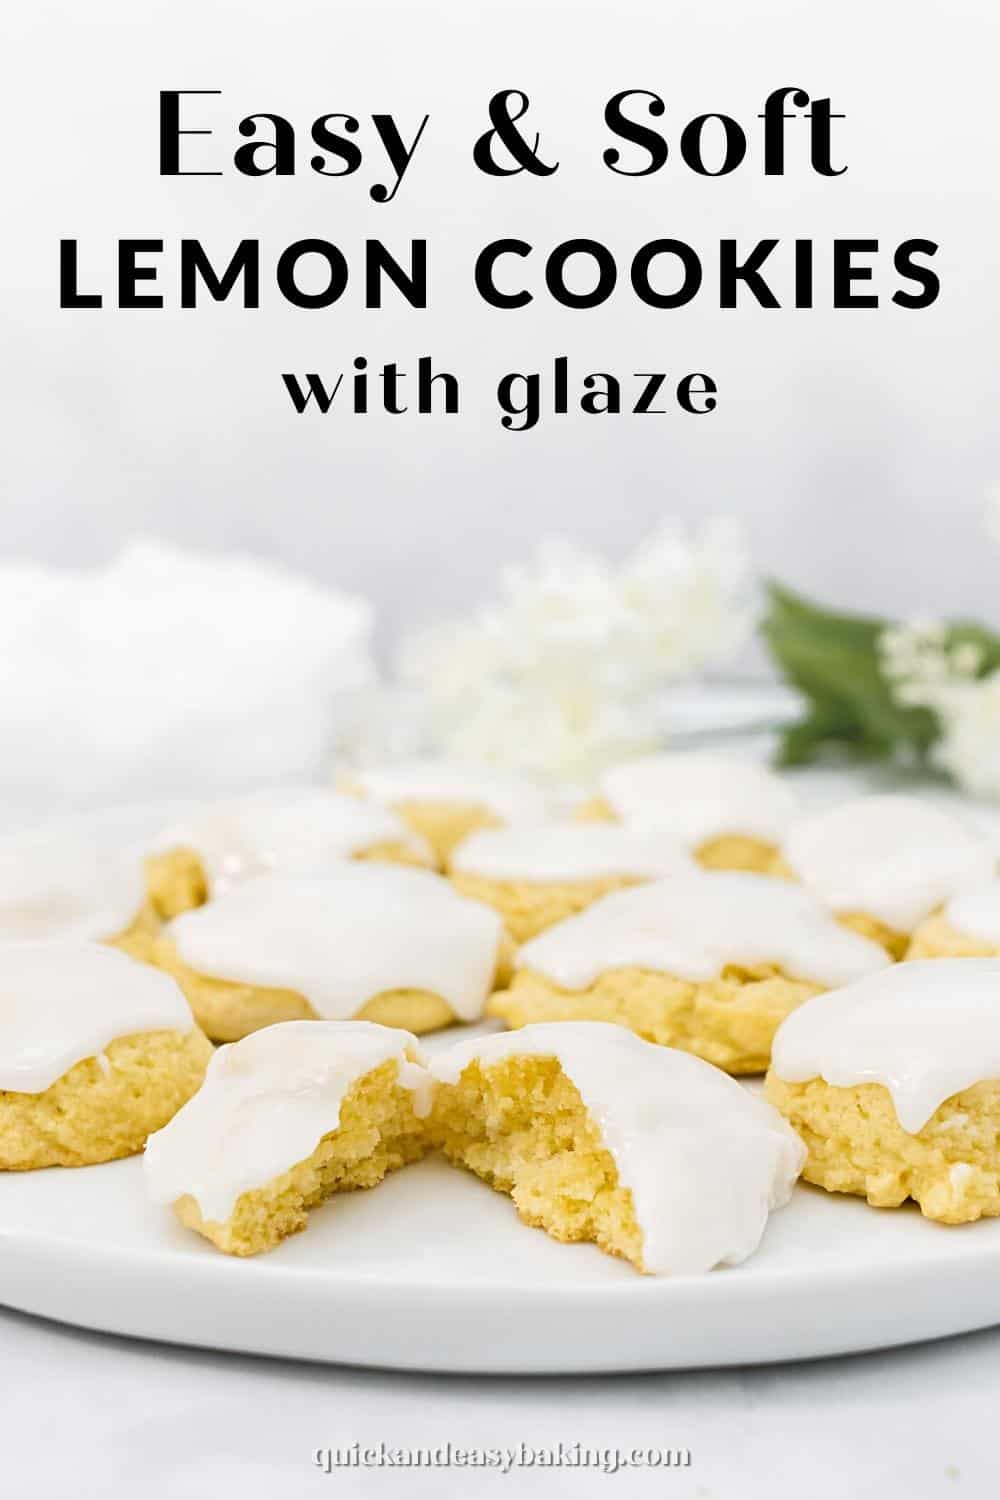 Lemon cookies on a white plate with text overlay.